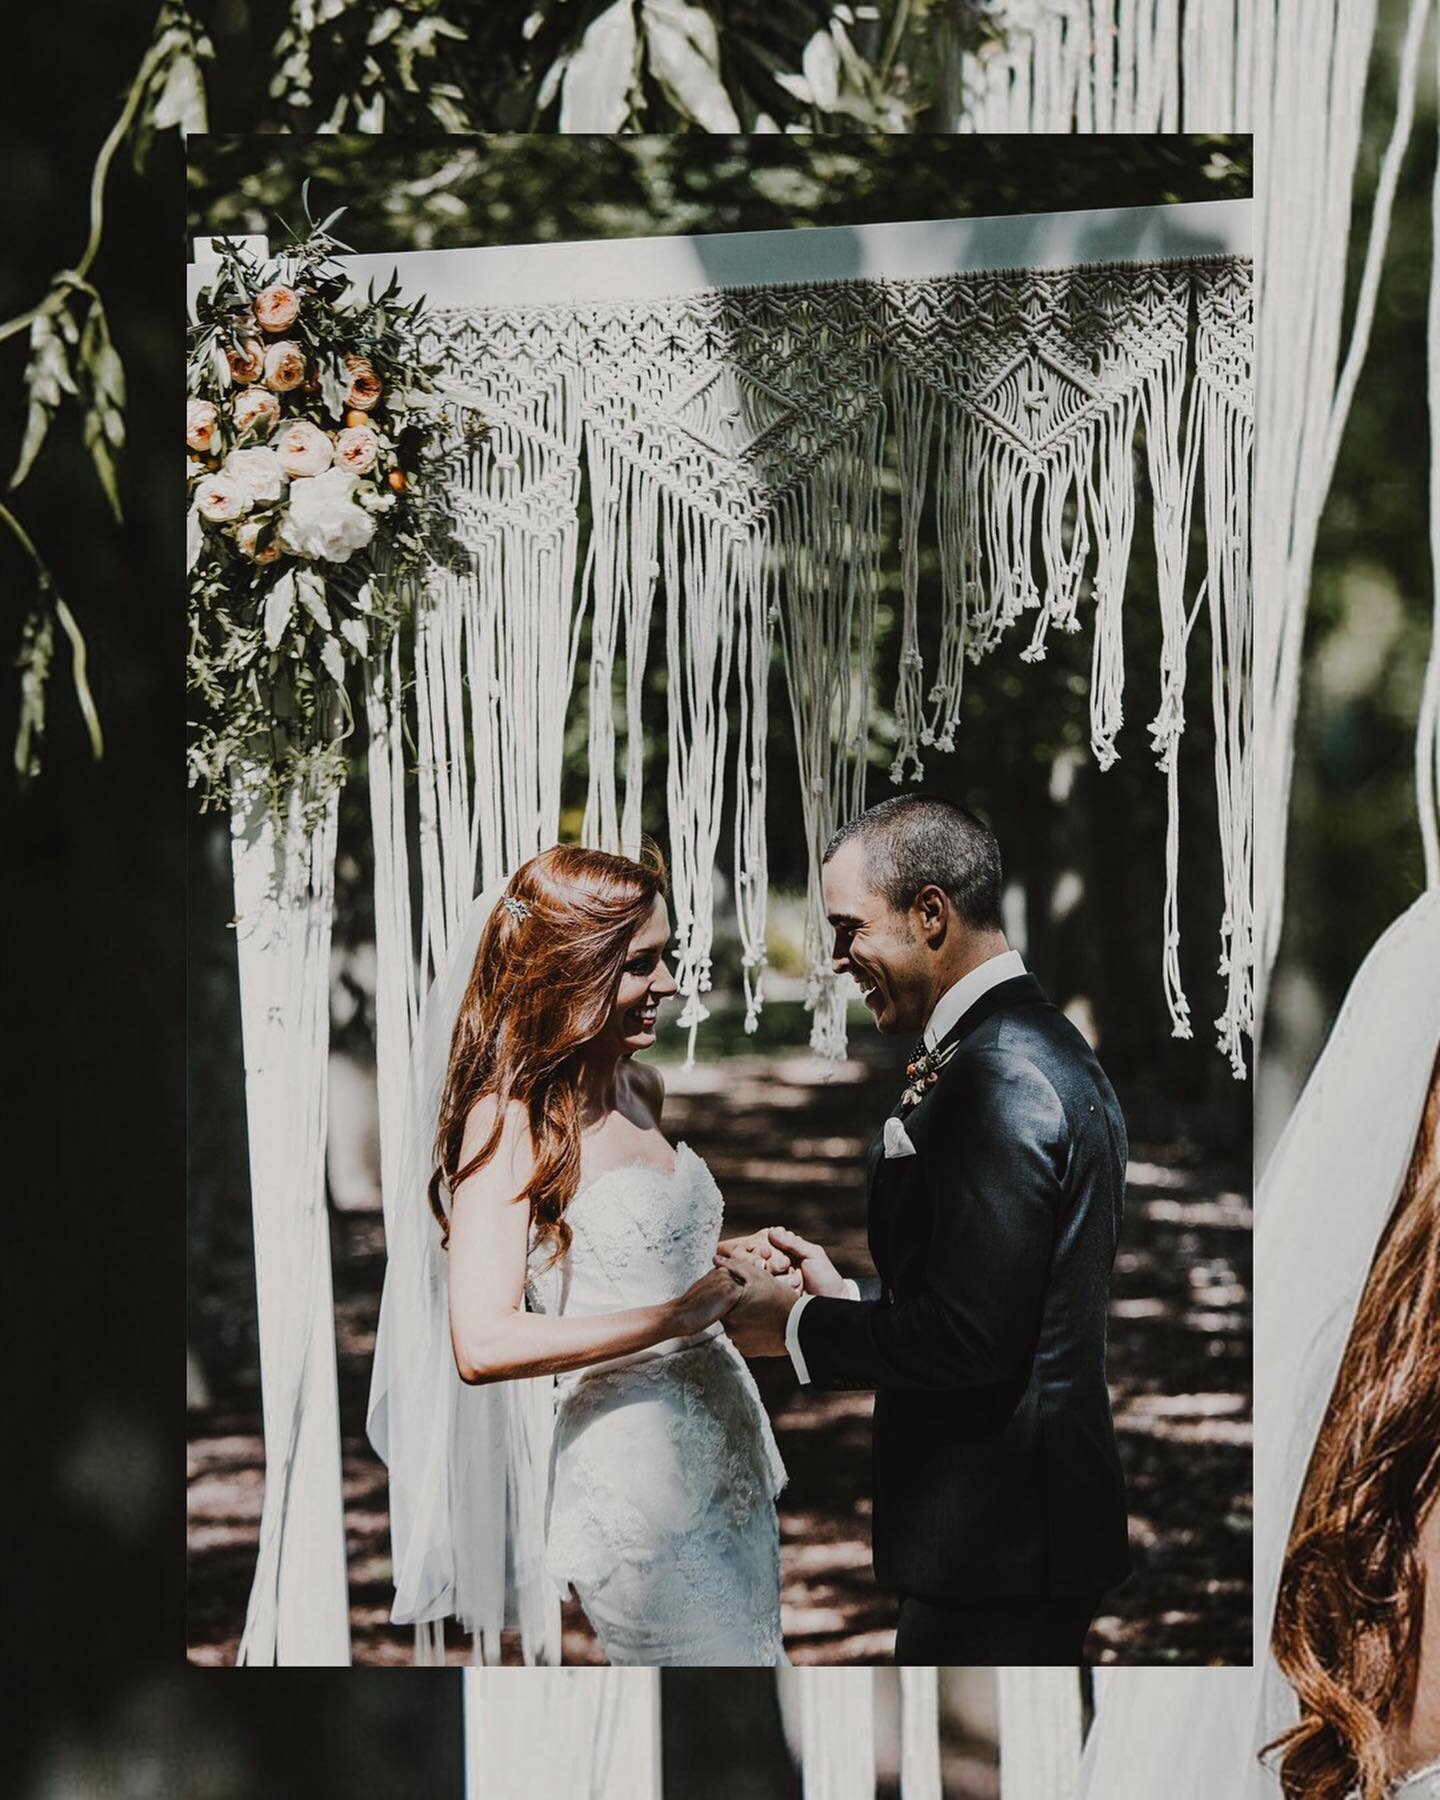 This fitzroy garden wedding of Deb n Julien was a spectacular celebration of love and life, surrounded by lush nature and beautiful floral installations. 
.
.
.
.⠀
.⠀
.⠀
.⠀
#intimatewedding#loveislove#adventorouswedding#bridetrends#brideandgroom#real